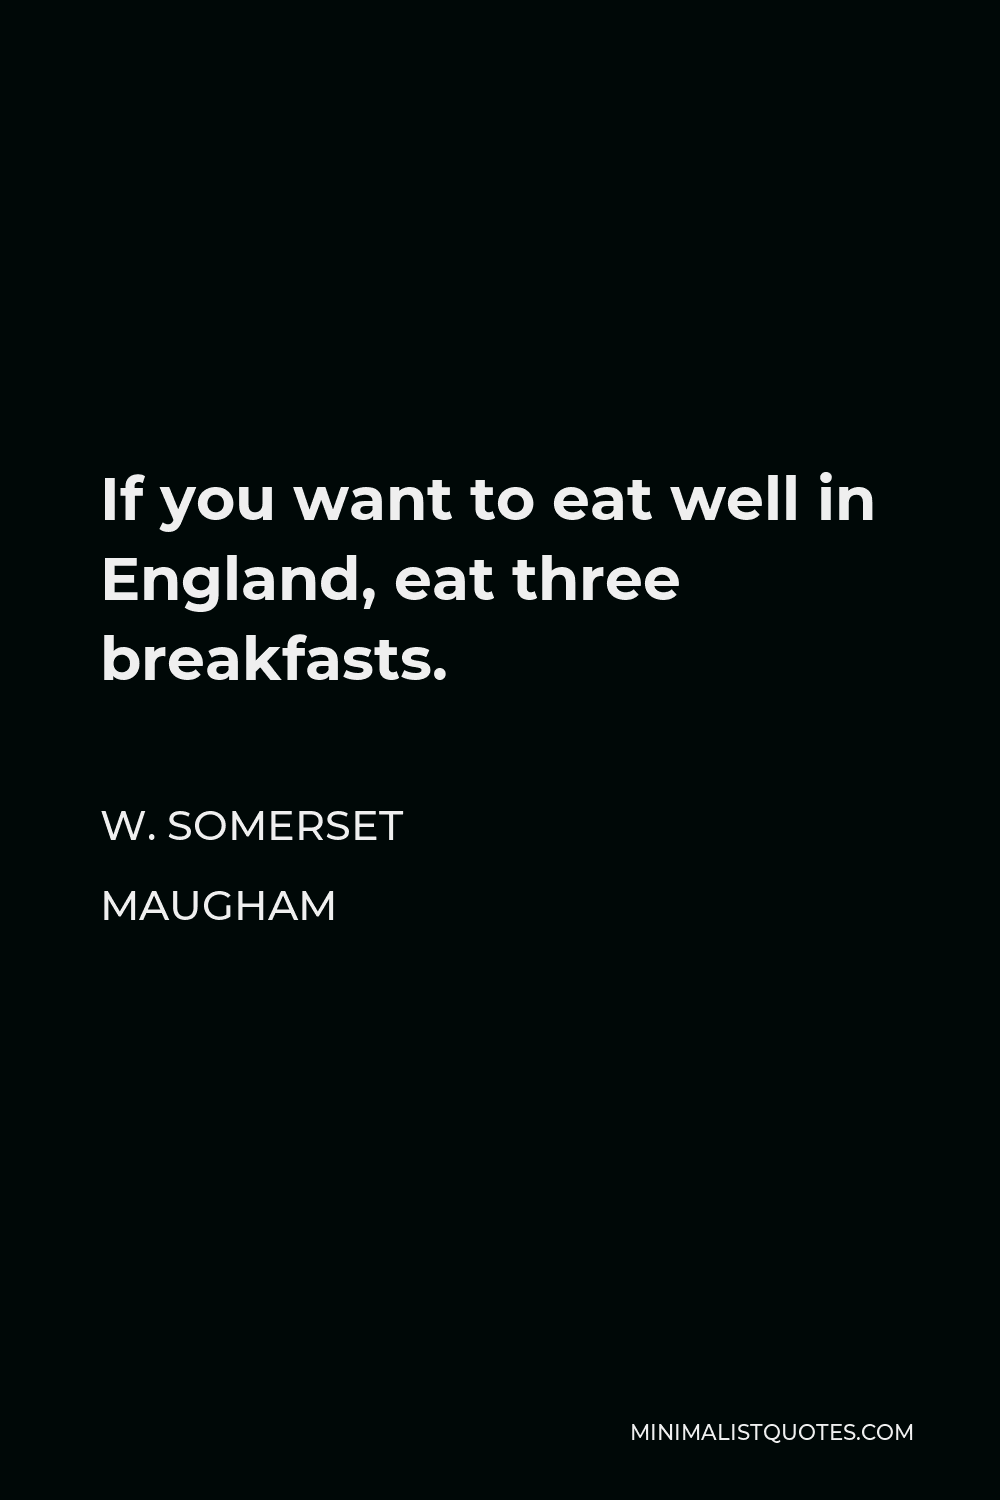 W. Somerset Maugham Quote - If you want to eat well in England, eat three breakfasts.